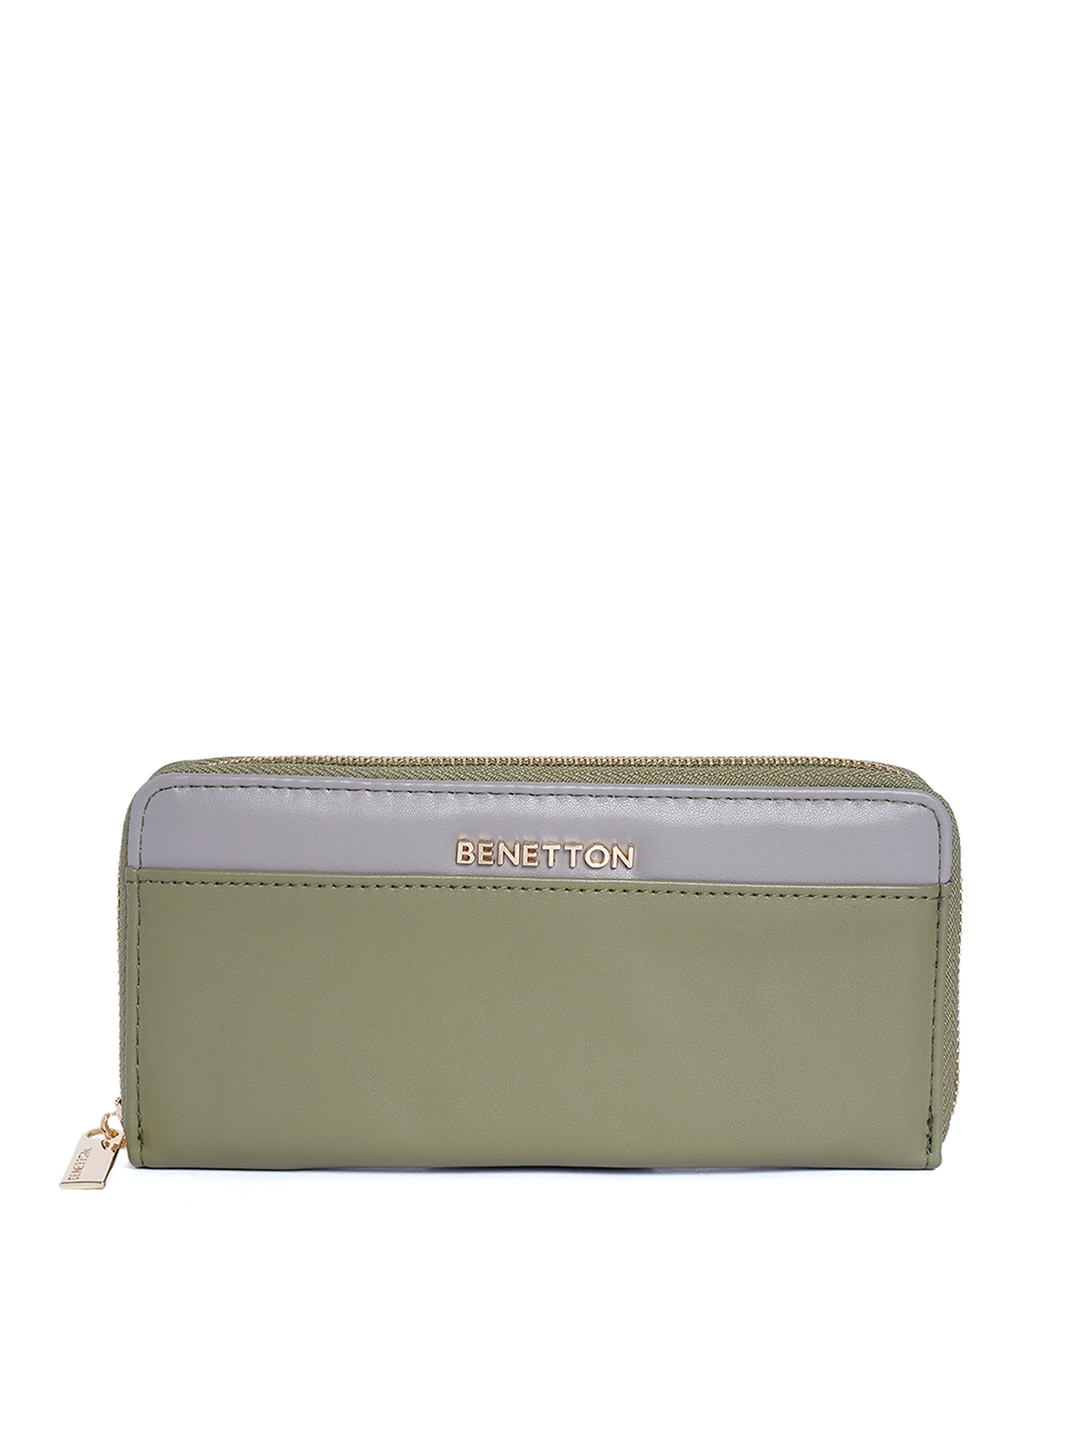 United Colors of Benetton Olive Green Solid Zip Around Wallet Price in India